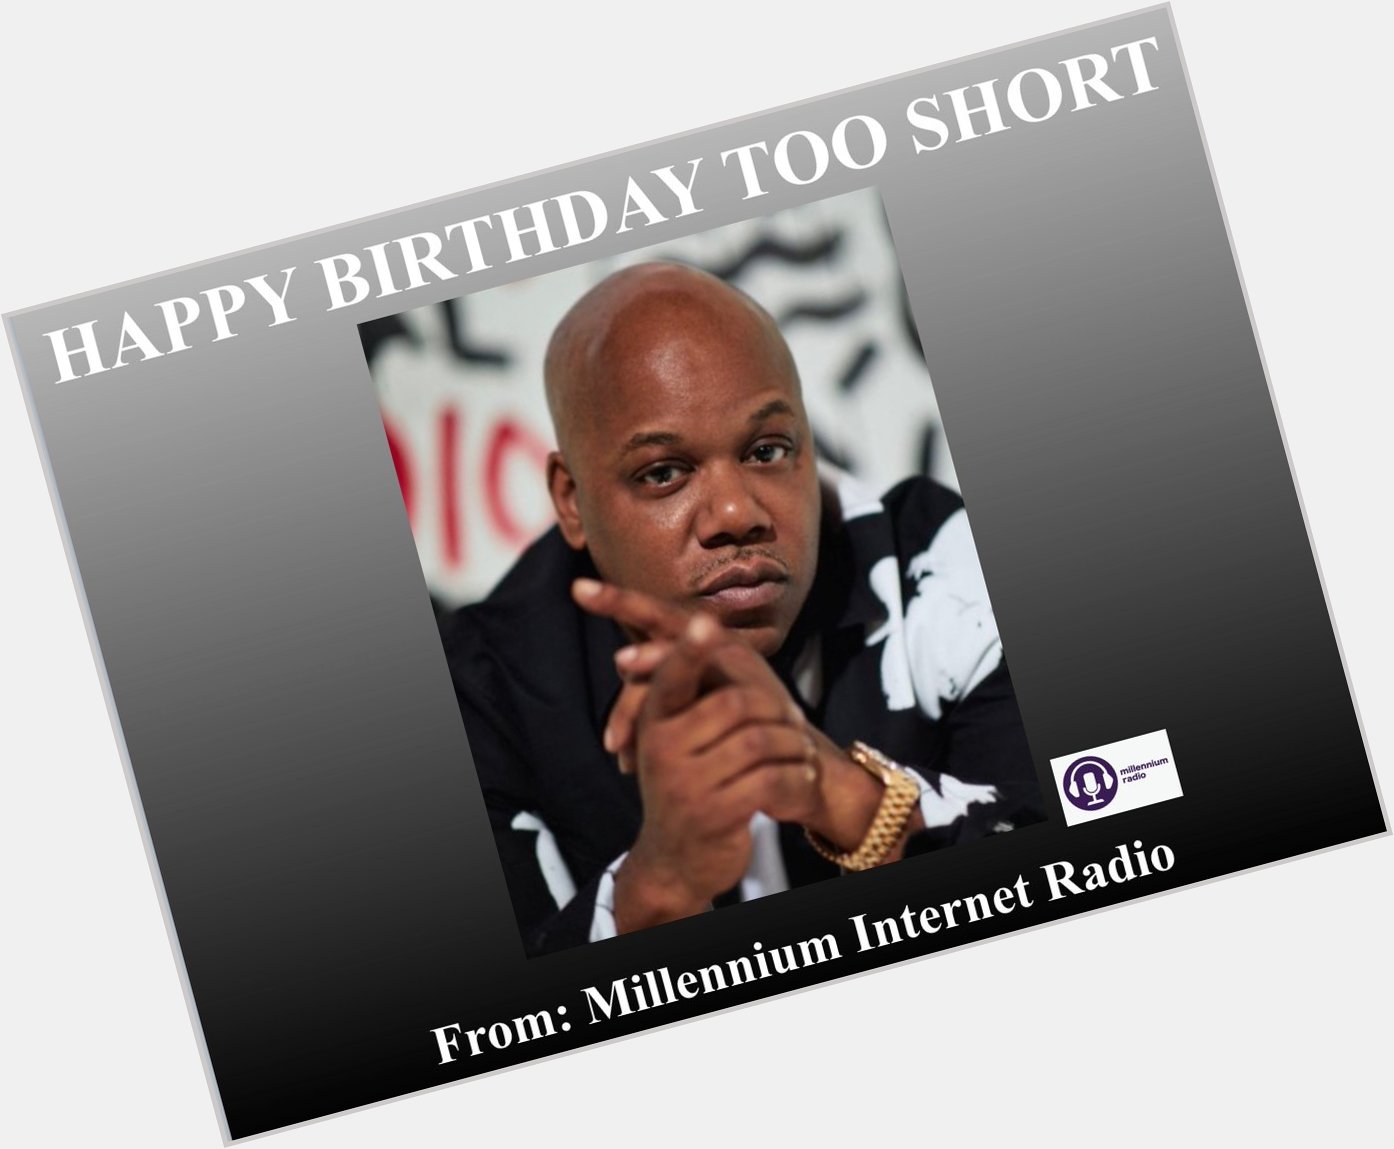 HAPPY BIRTHDAY TO RAPPER AND RECORD PRODUCER TOO SHORT!! 